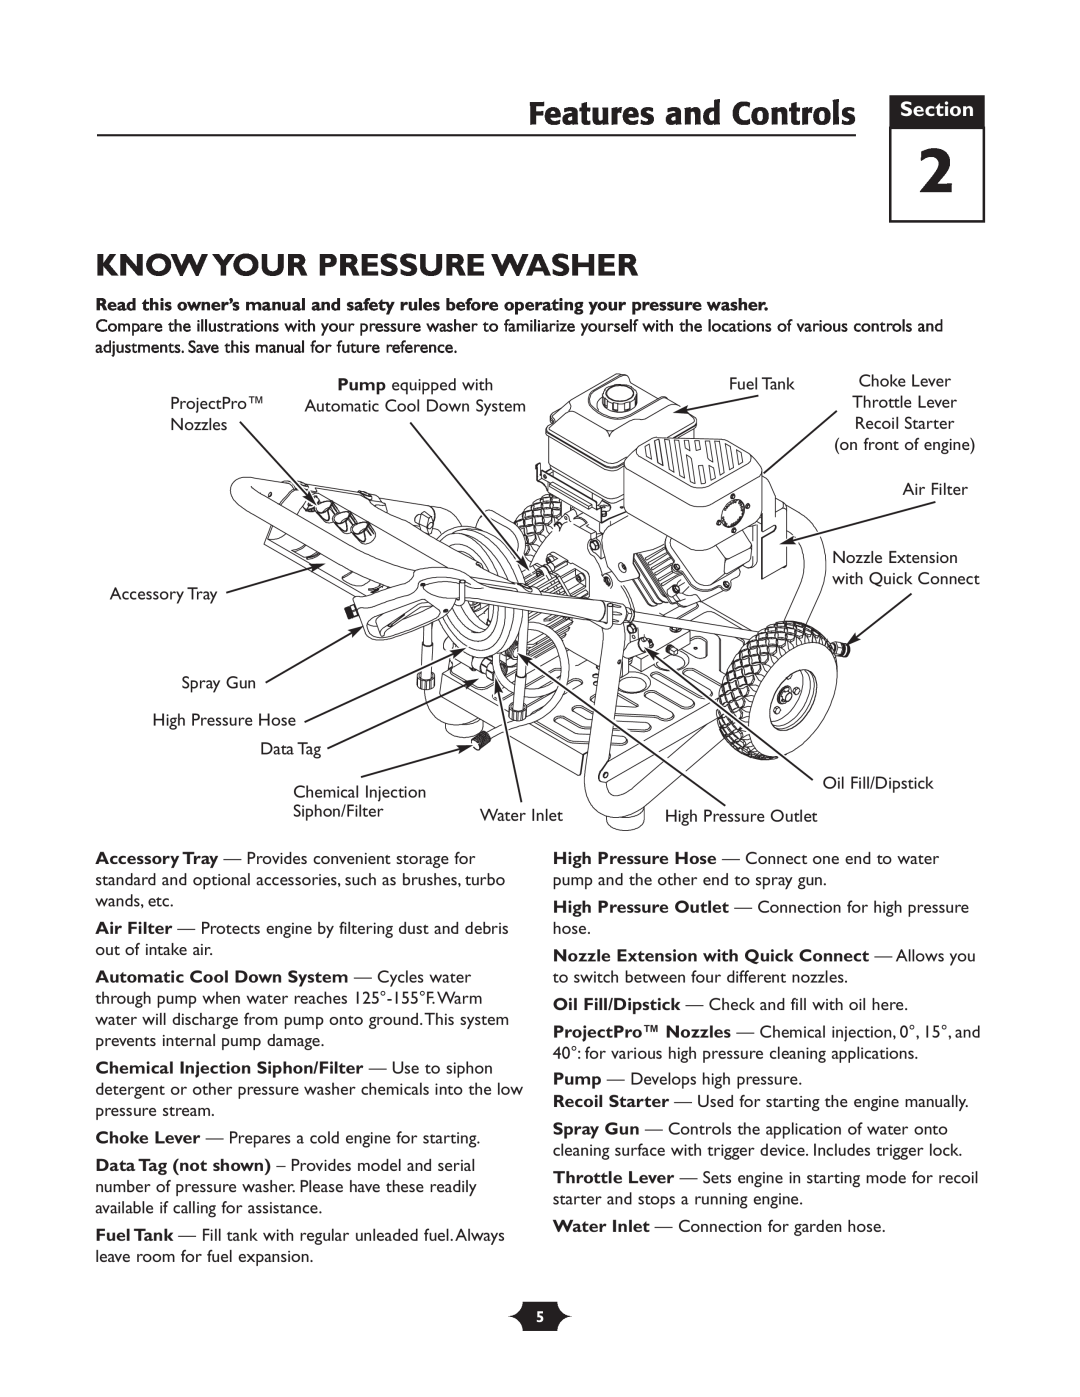 Troy-Bilt 020242-1 owner manual Features and Controls Section, Know Your Pressure Washer 